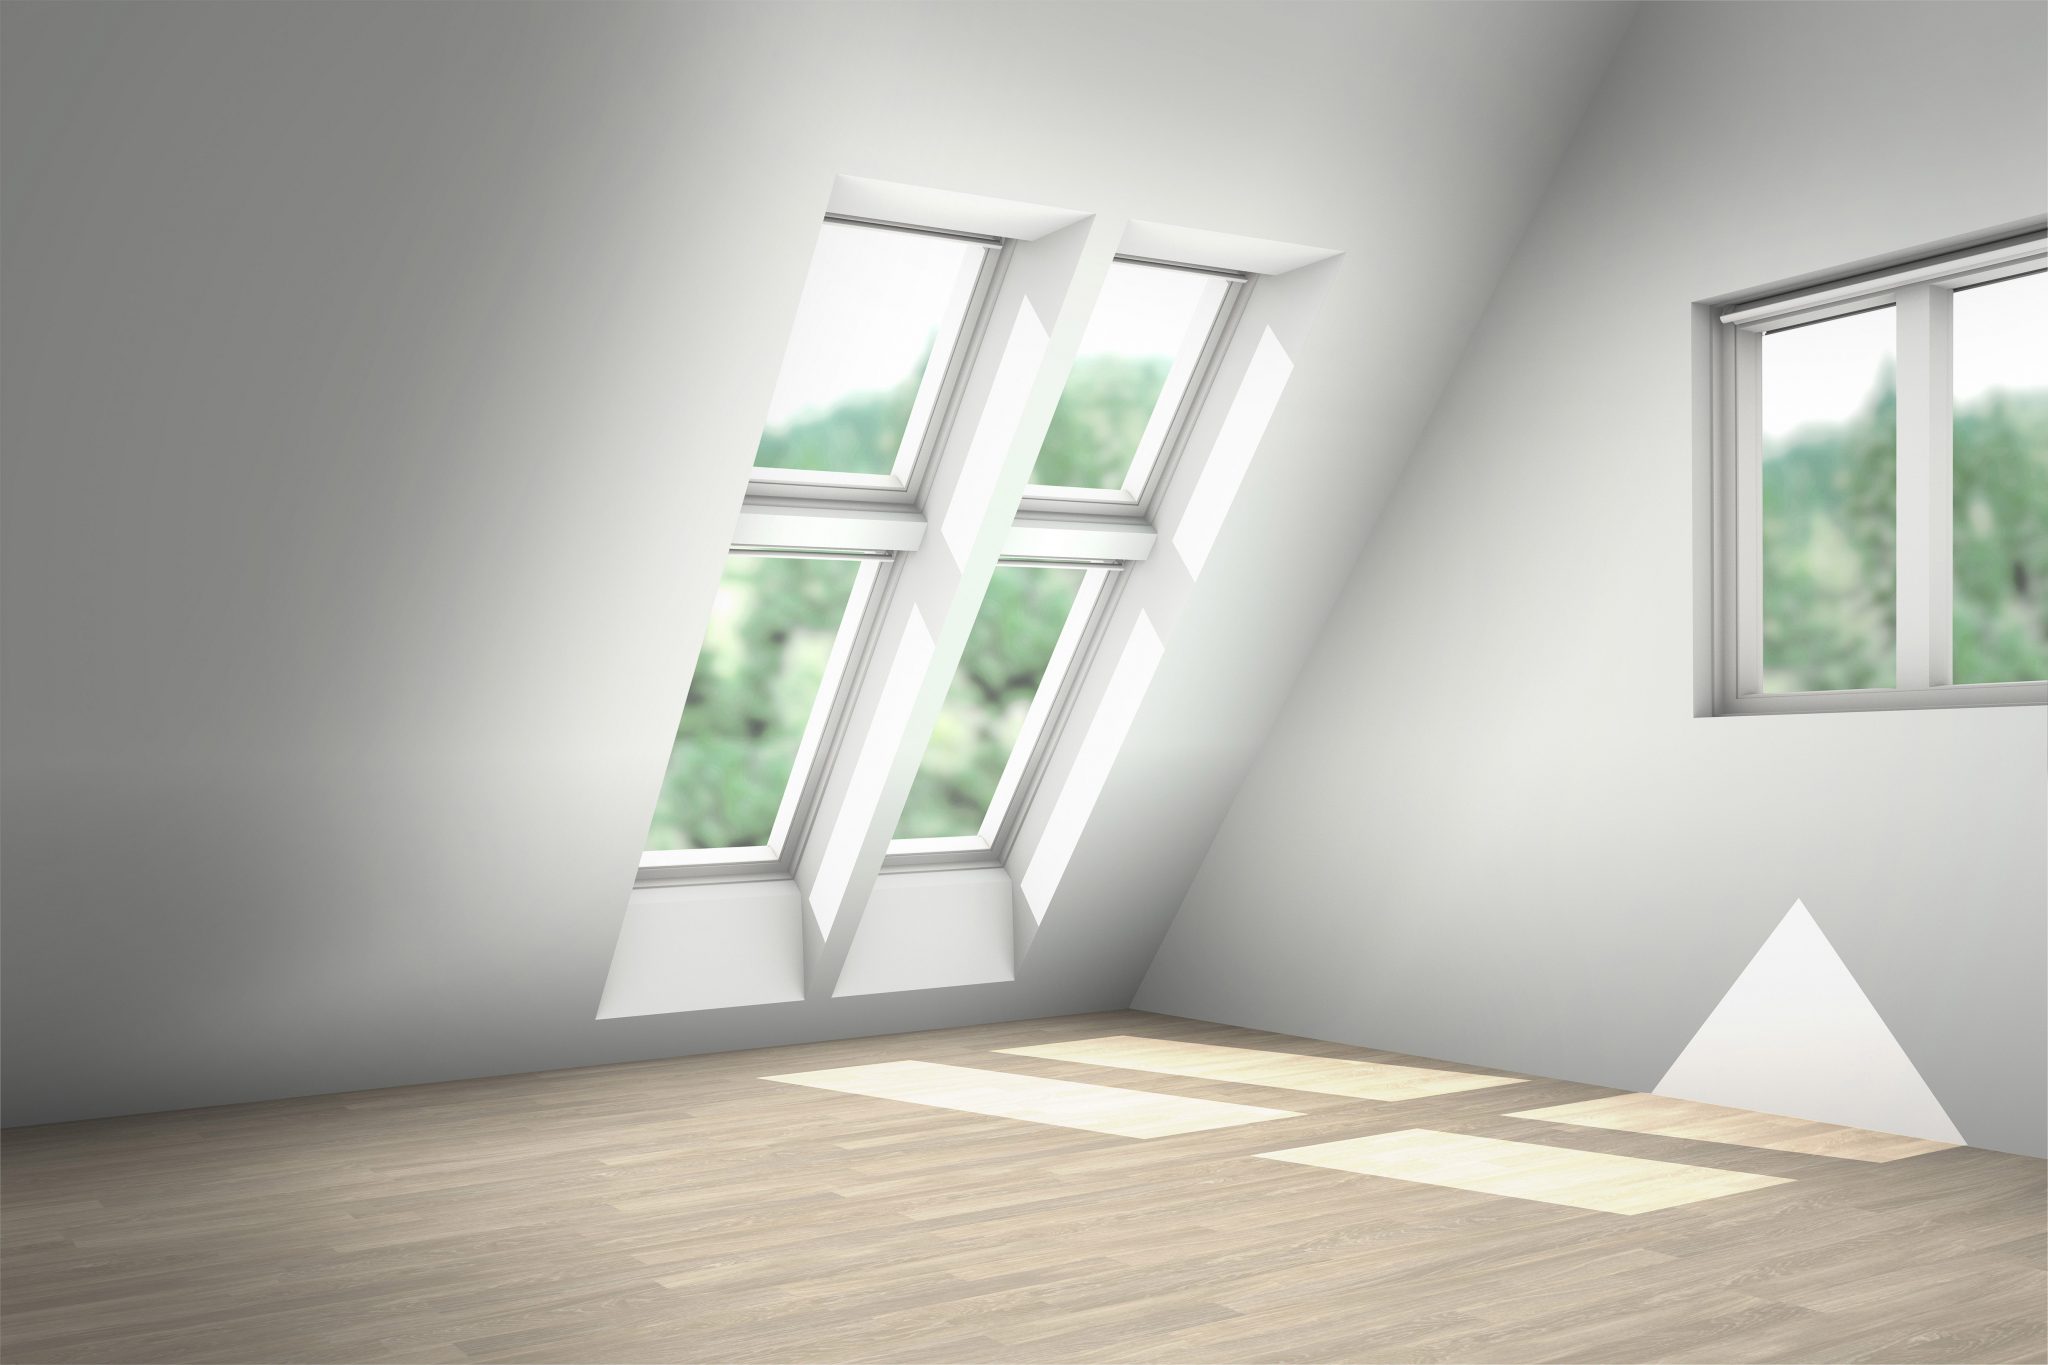 VELUX® launches MyDaylight – the world’s first virtual reality app for renovation design